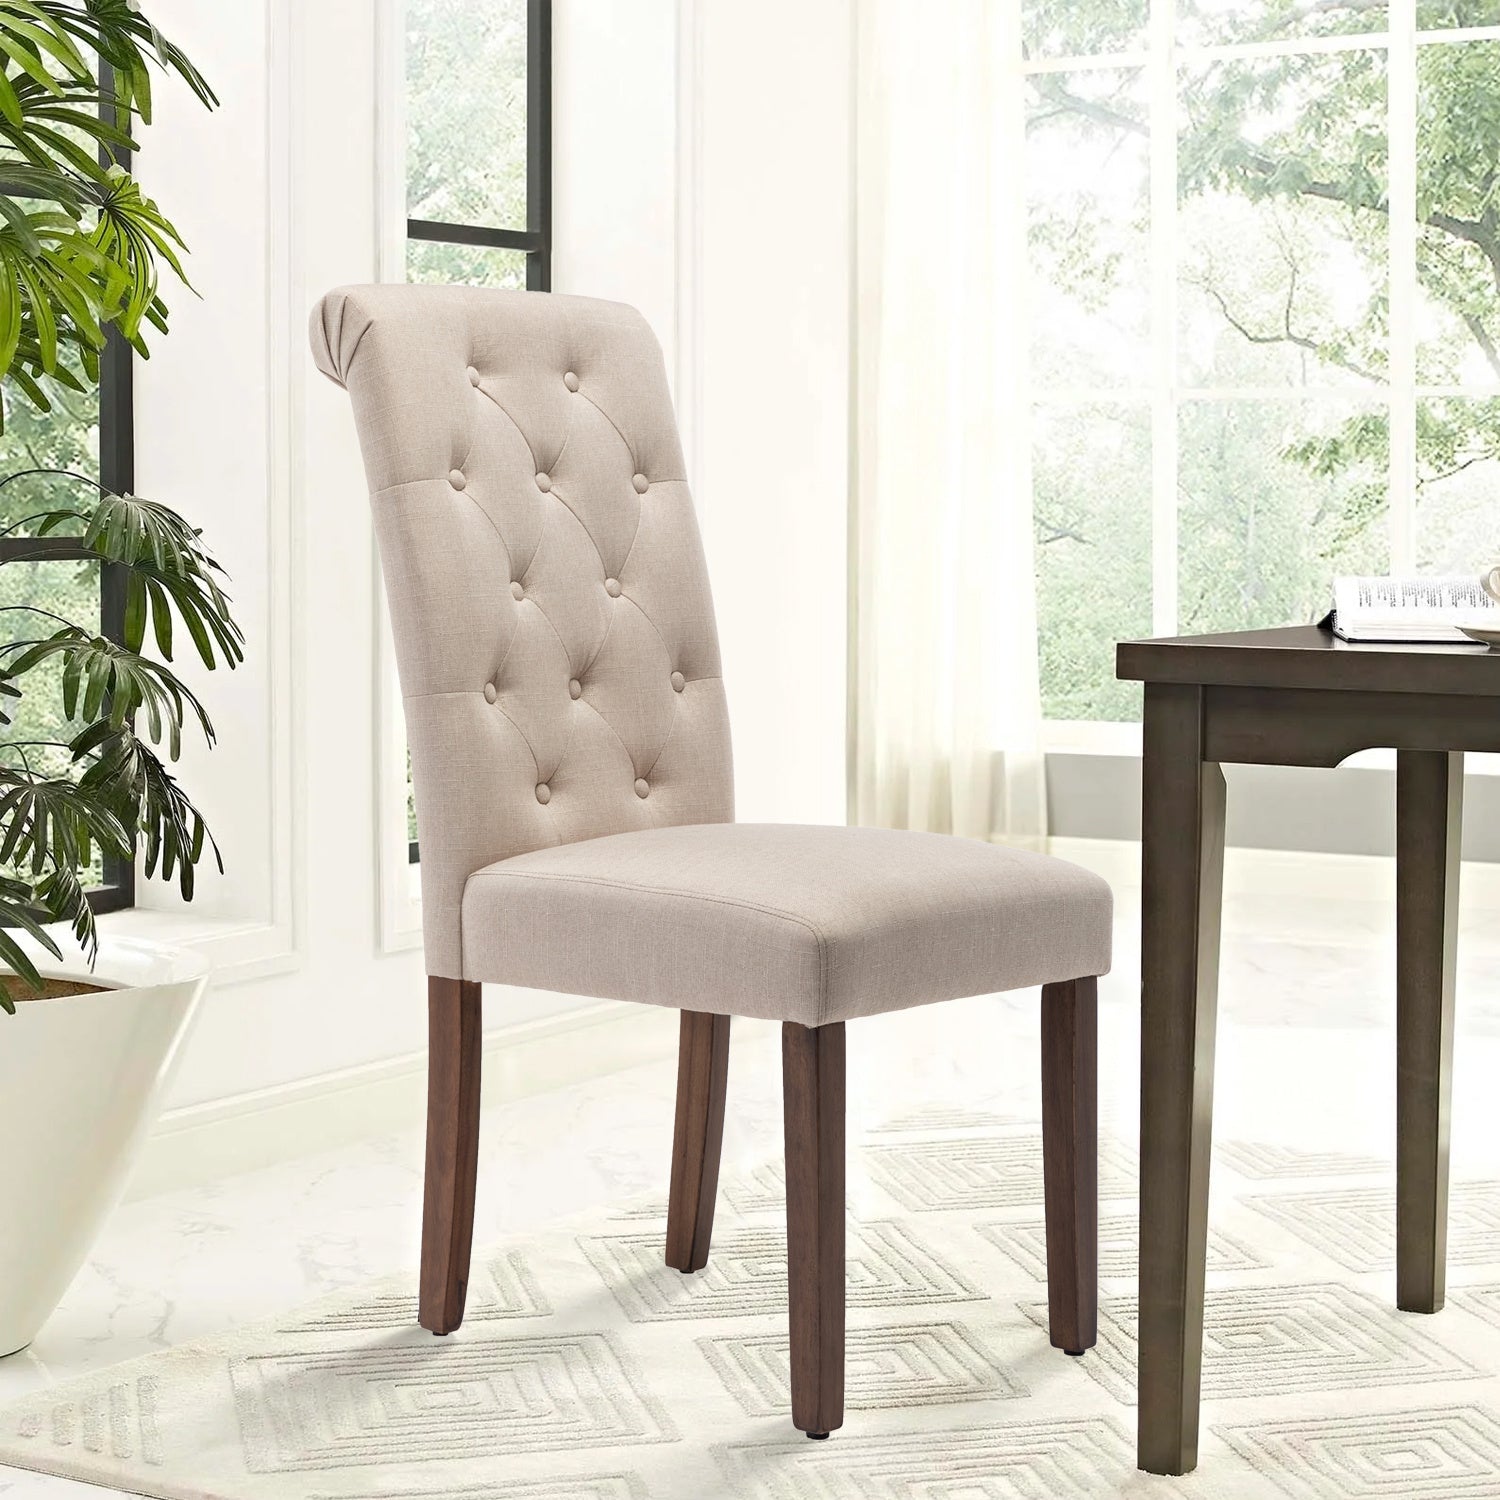 Free Shipping Qwork Furniture Classic Fabric Dining Chair with Wooden Legs - Set of 2